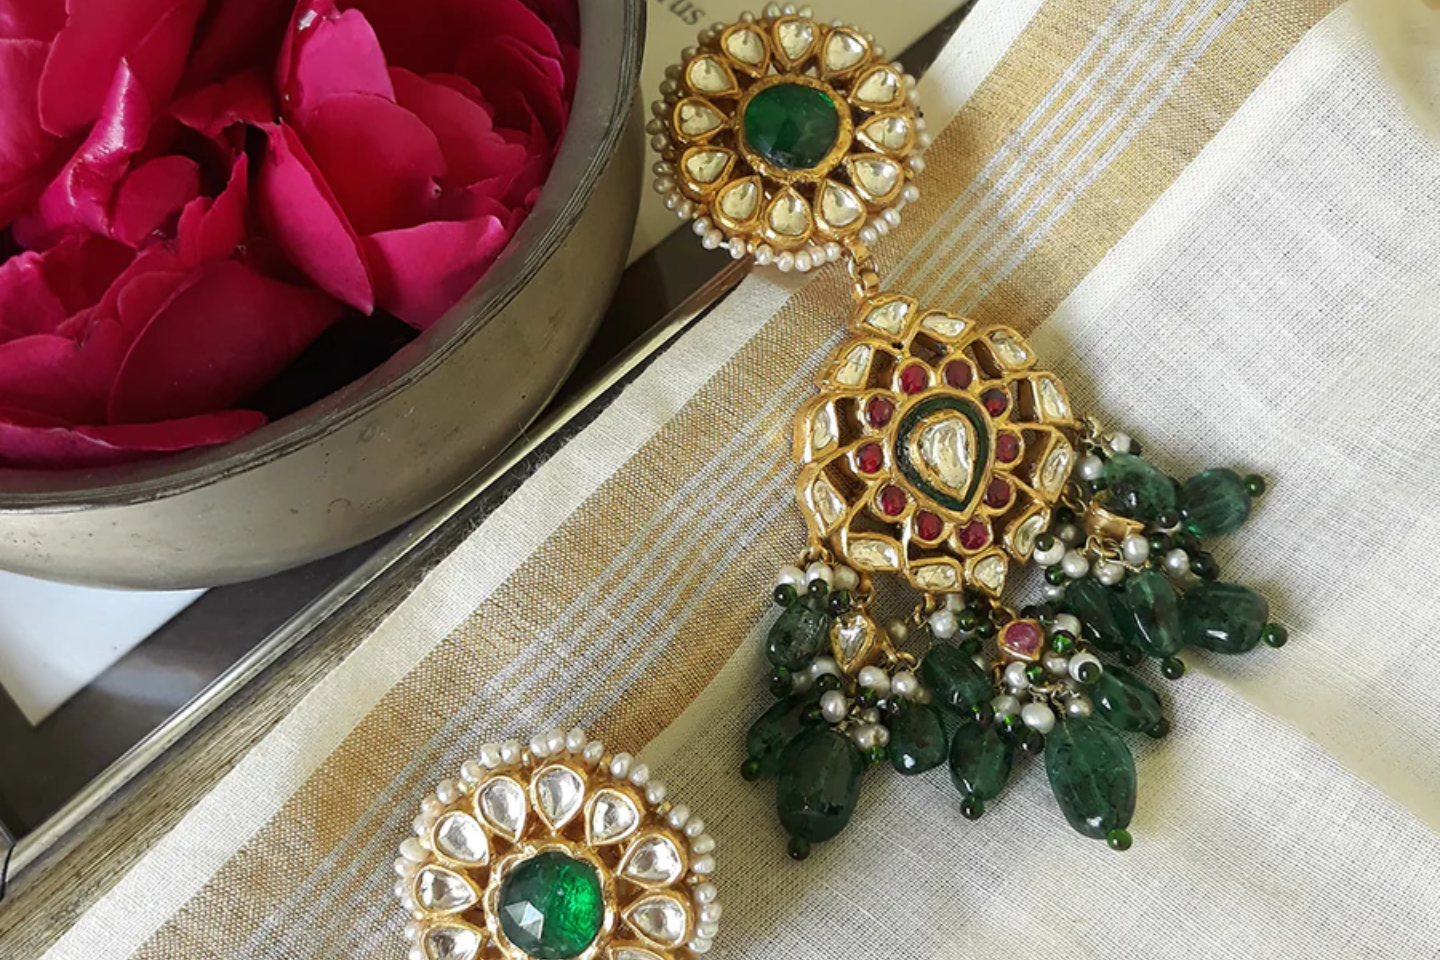 VILLAGE COUNCIL -Six Cool Facts About Handmade Earrings